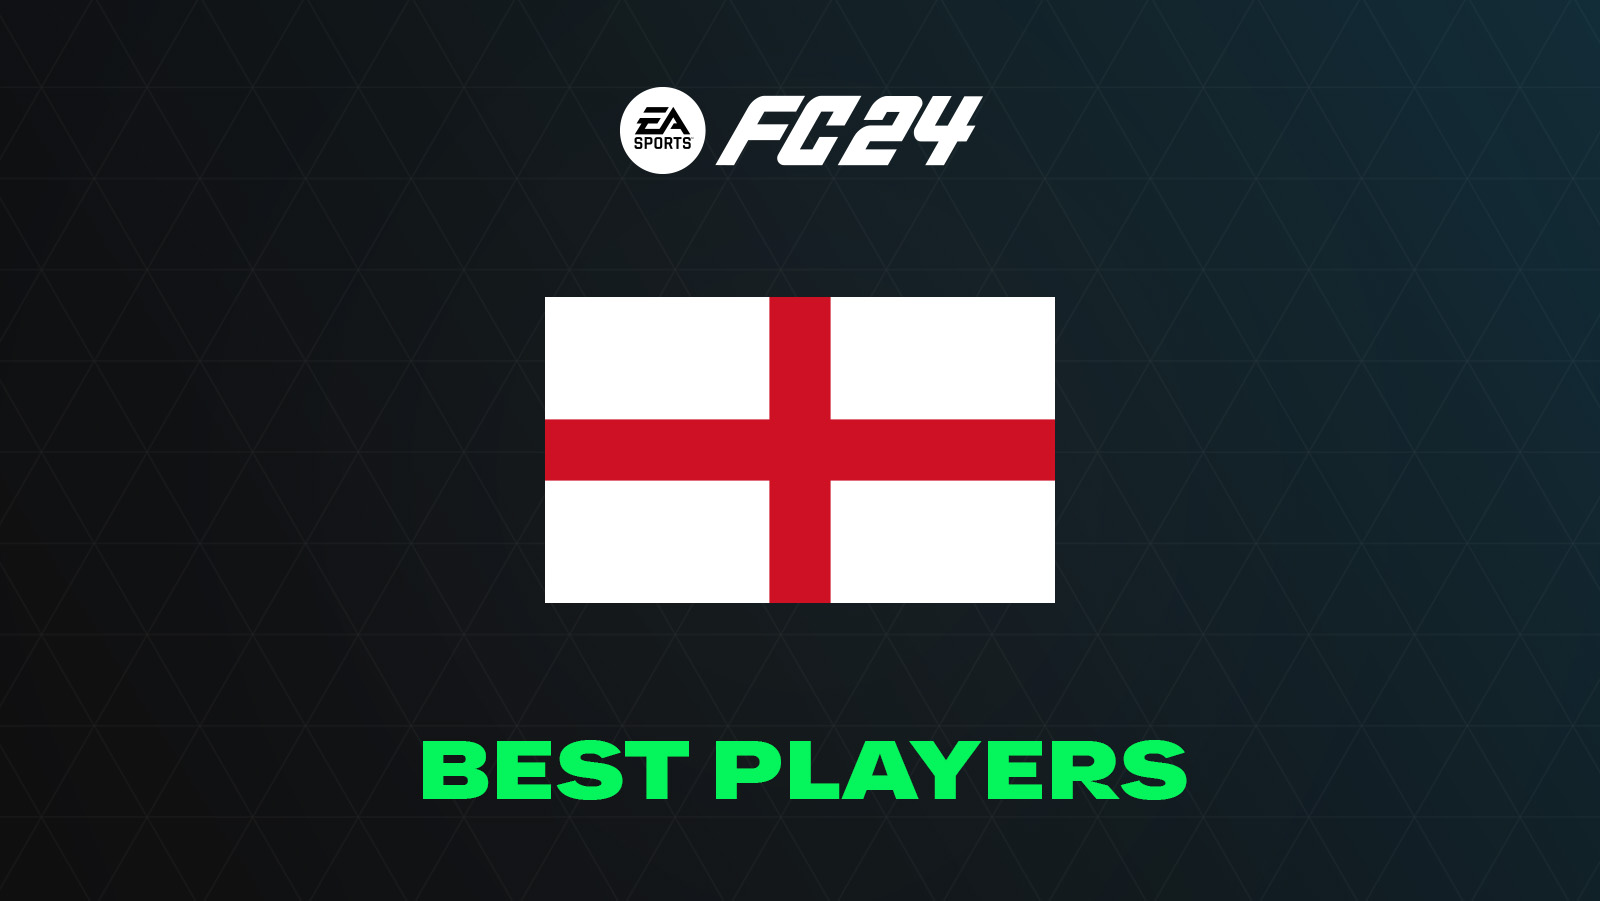 FC 24 Best English Players (Top GKs, Defenders, Midfielders & Attackers)